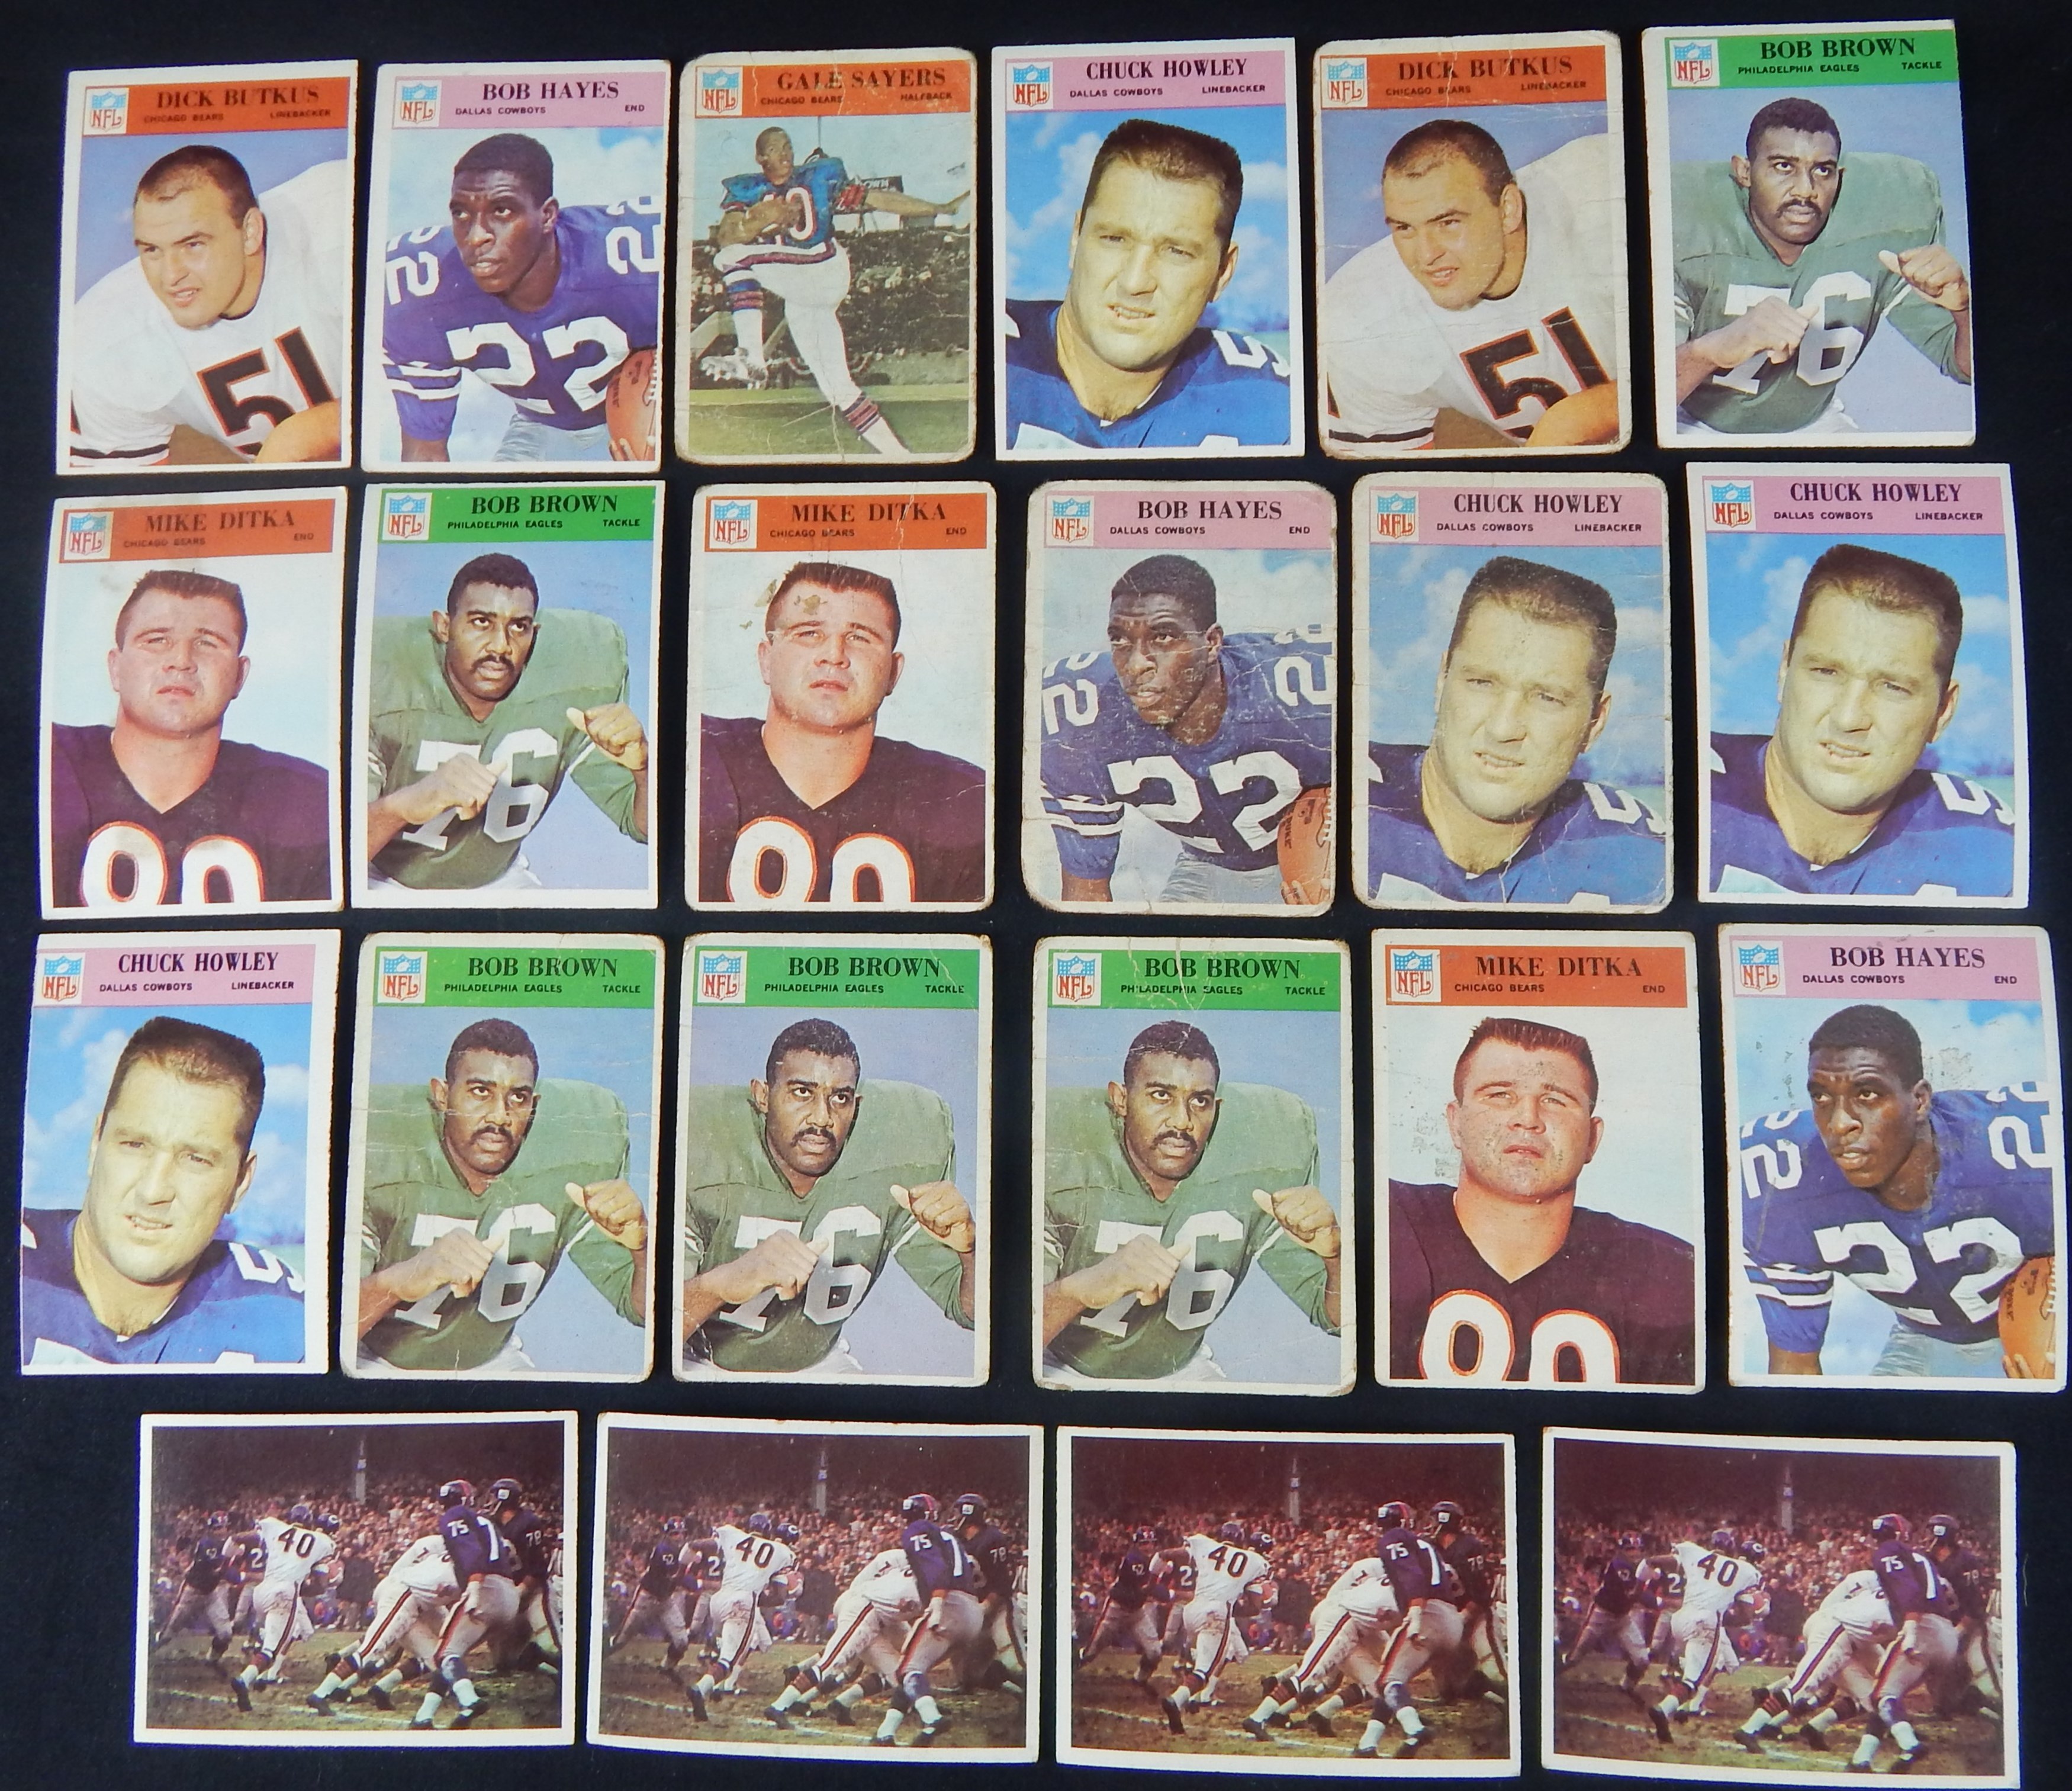 Baseball and Trading Cards - 1966 Philadelphia Football Collection of 770 Cards with TWO Partial Sets